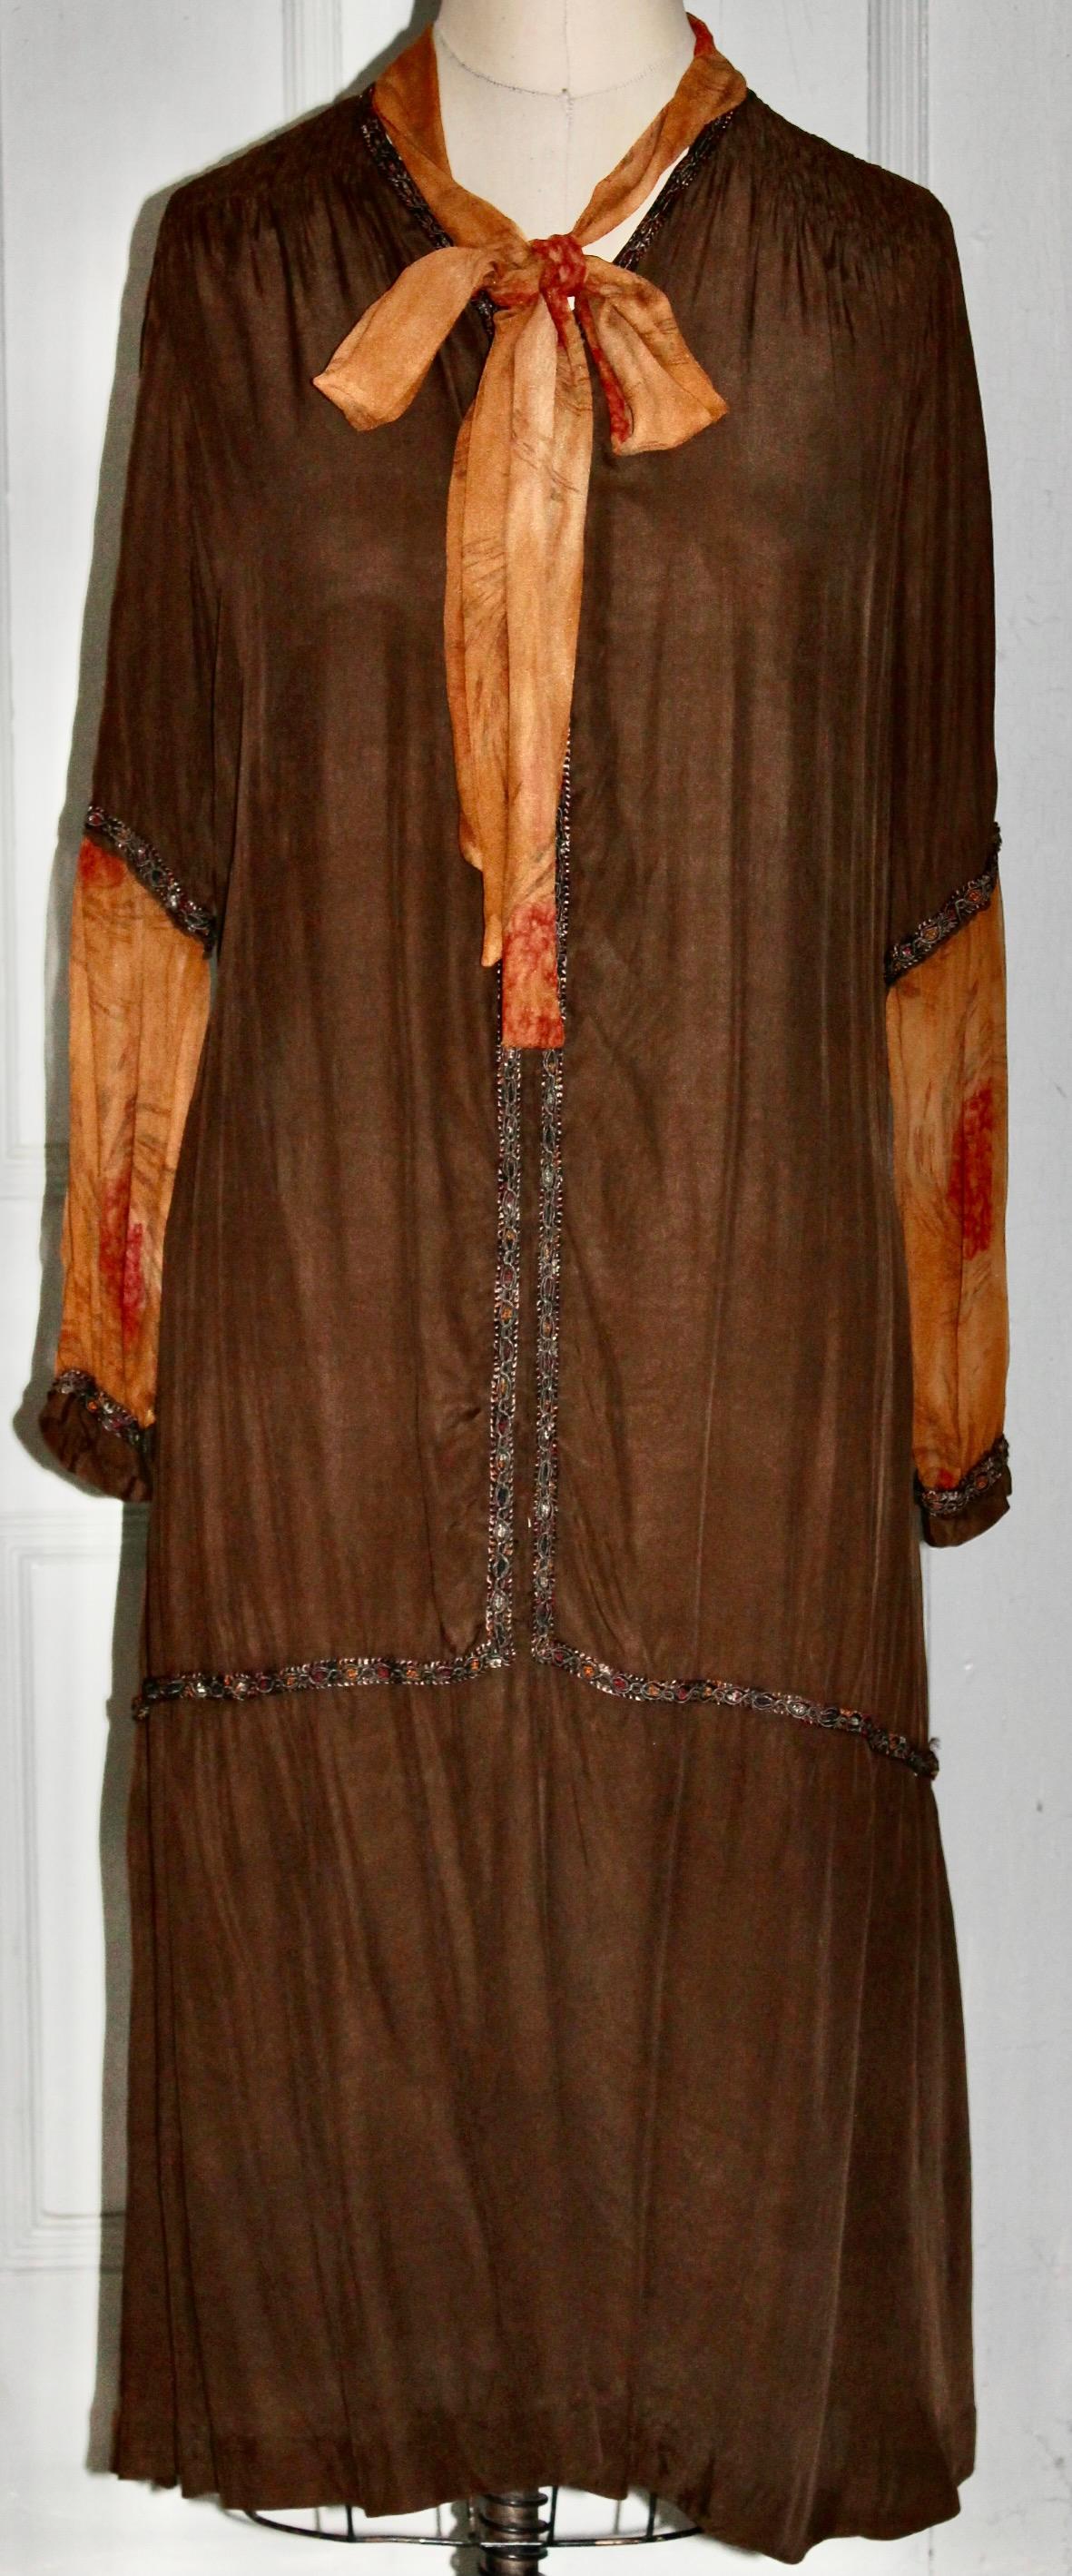 Offering a 20's Edwardian Style (dropped waist) 'Flapper Dress', silk with a braid trim.  Unmarked, but was purchased with (and included with) a matching brown velvet French Hat  with a Maria Guy 8 Place Vendome, Paris. label.